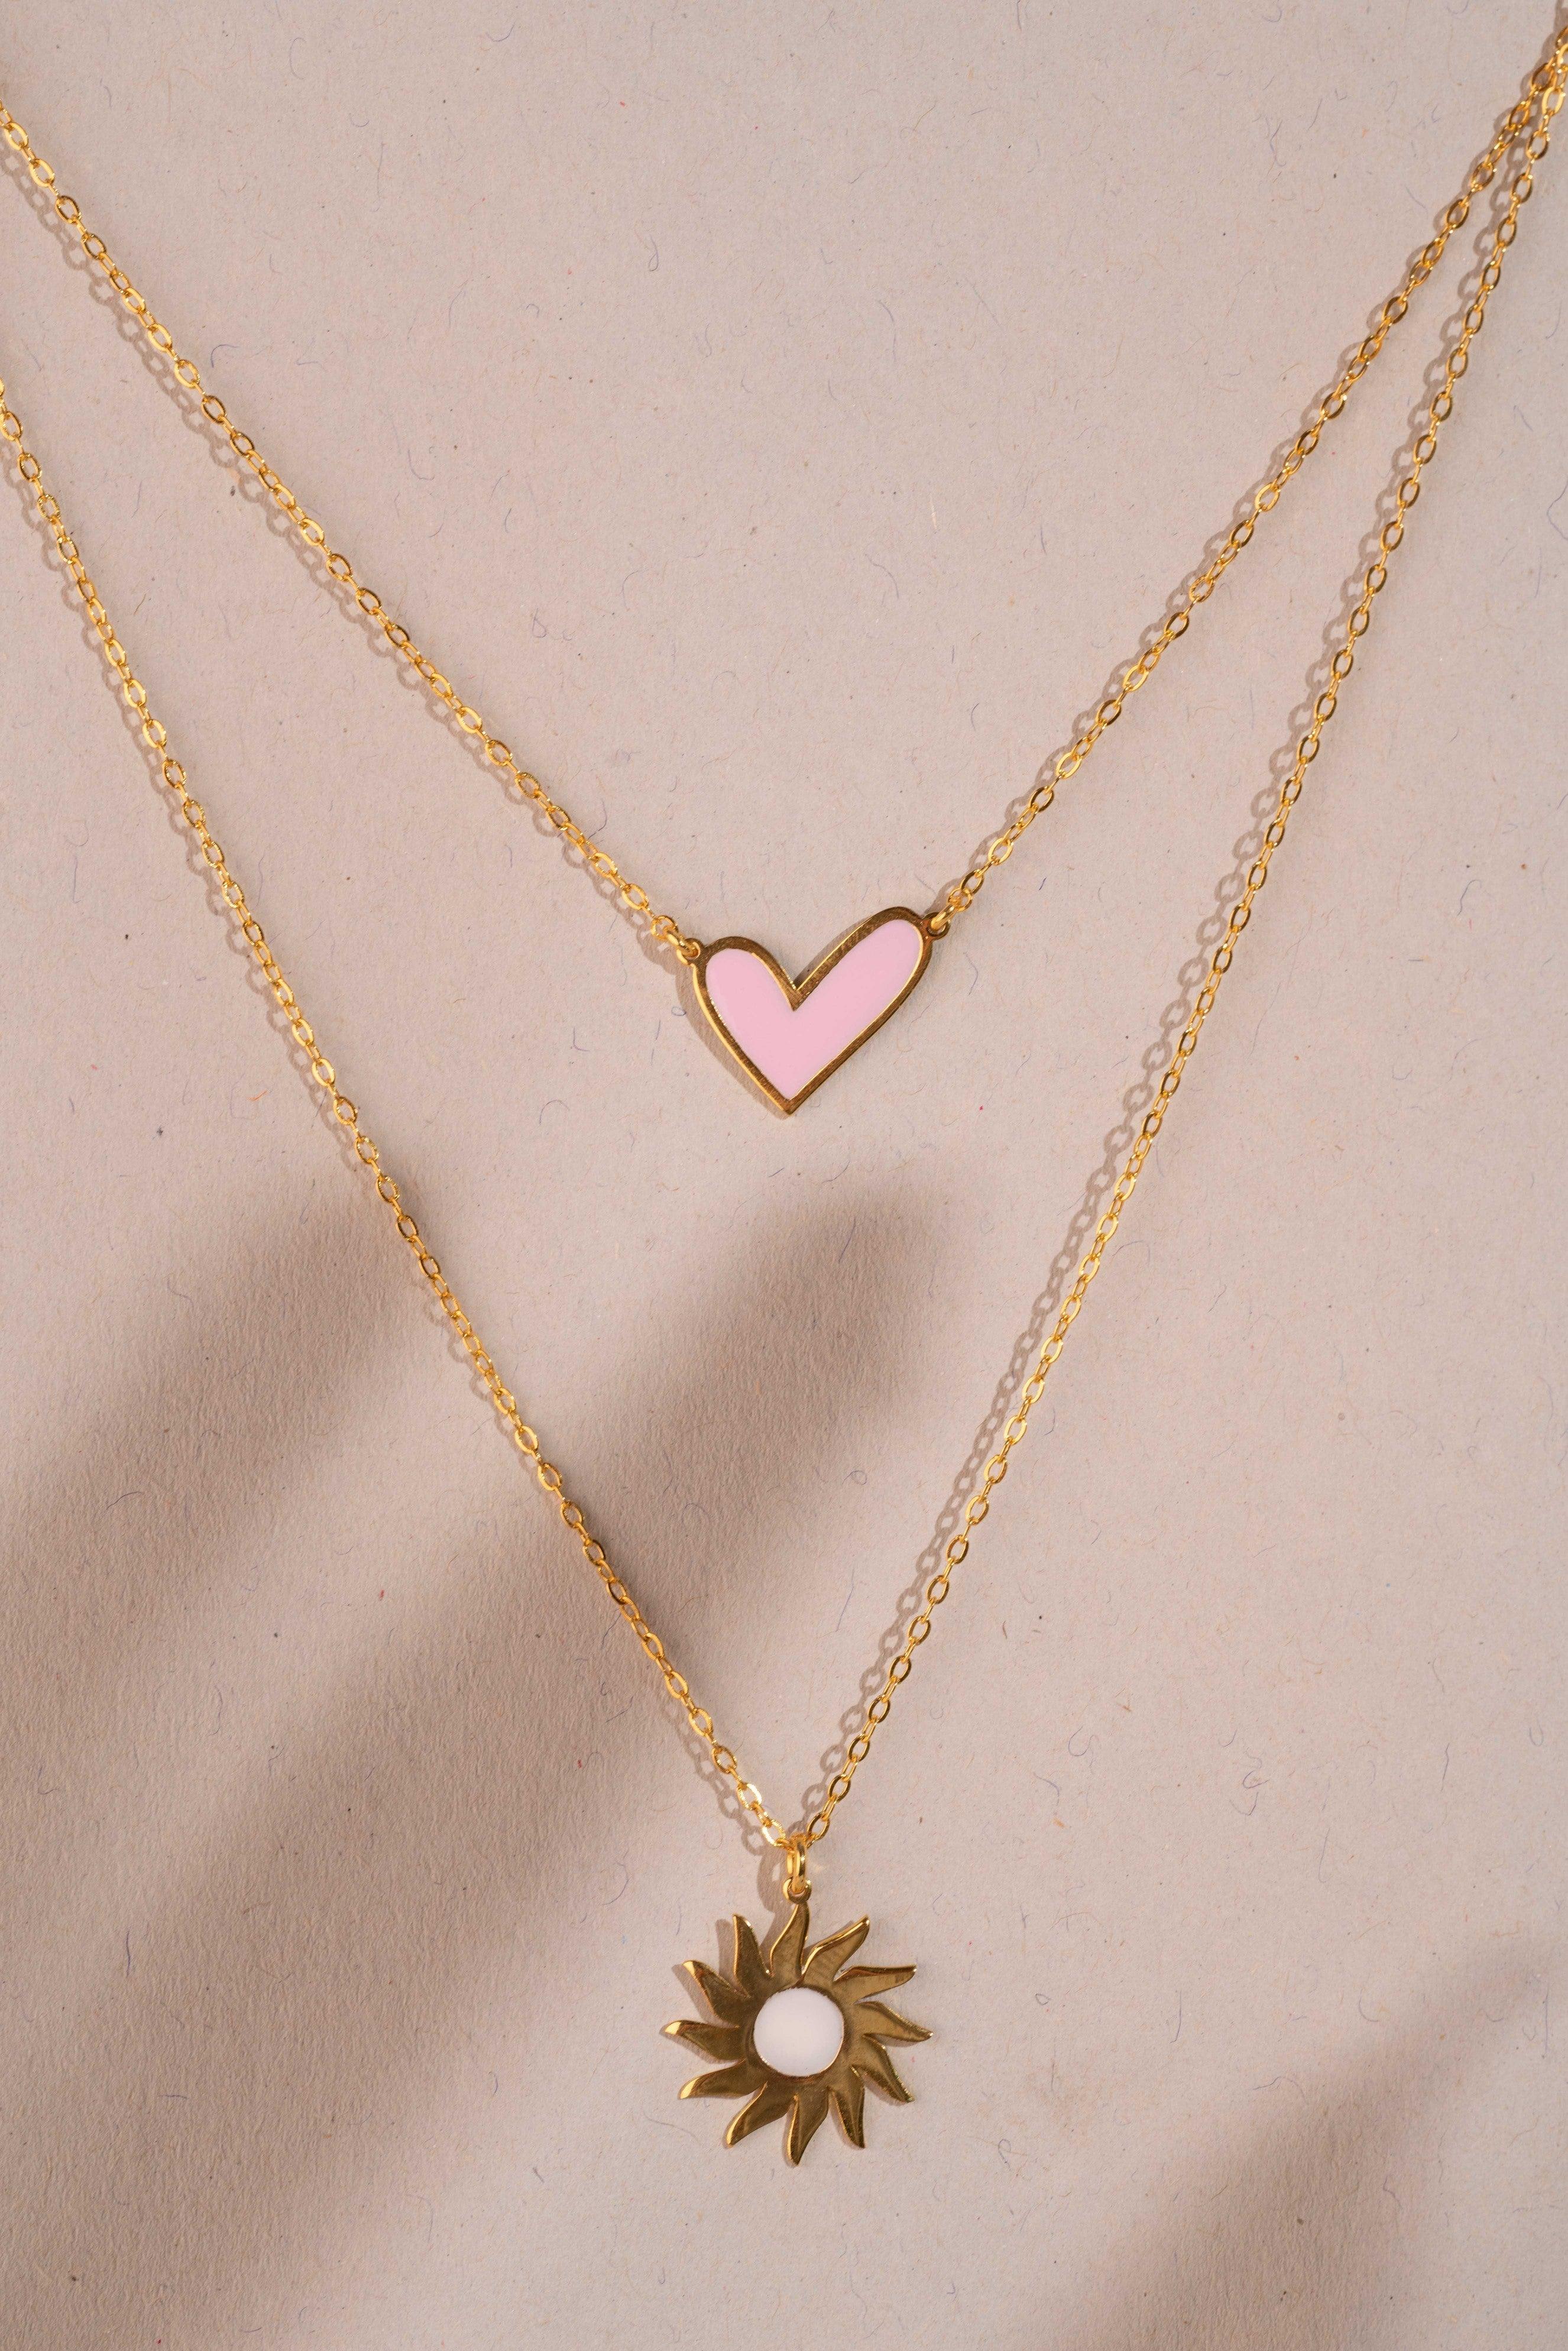 Heart With Sun Necklace - Yshmk